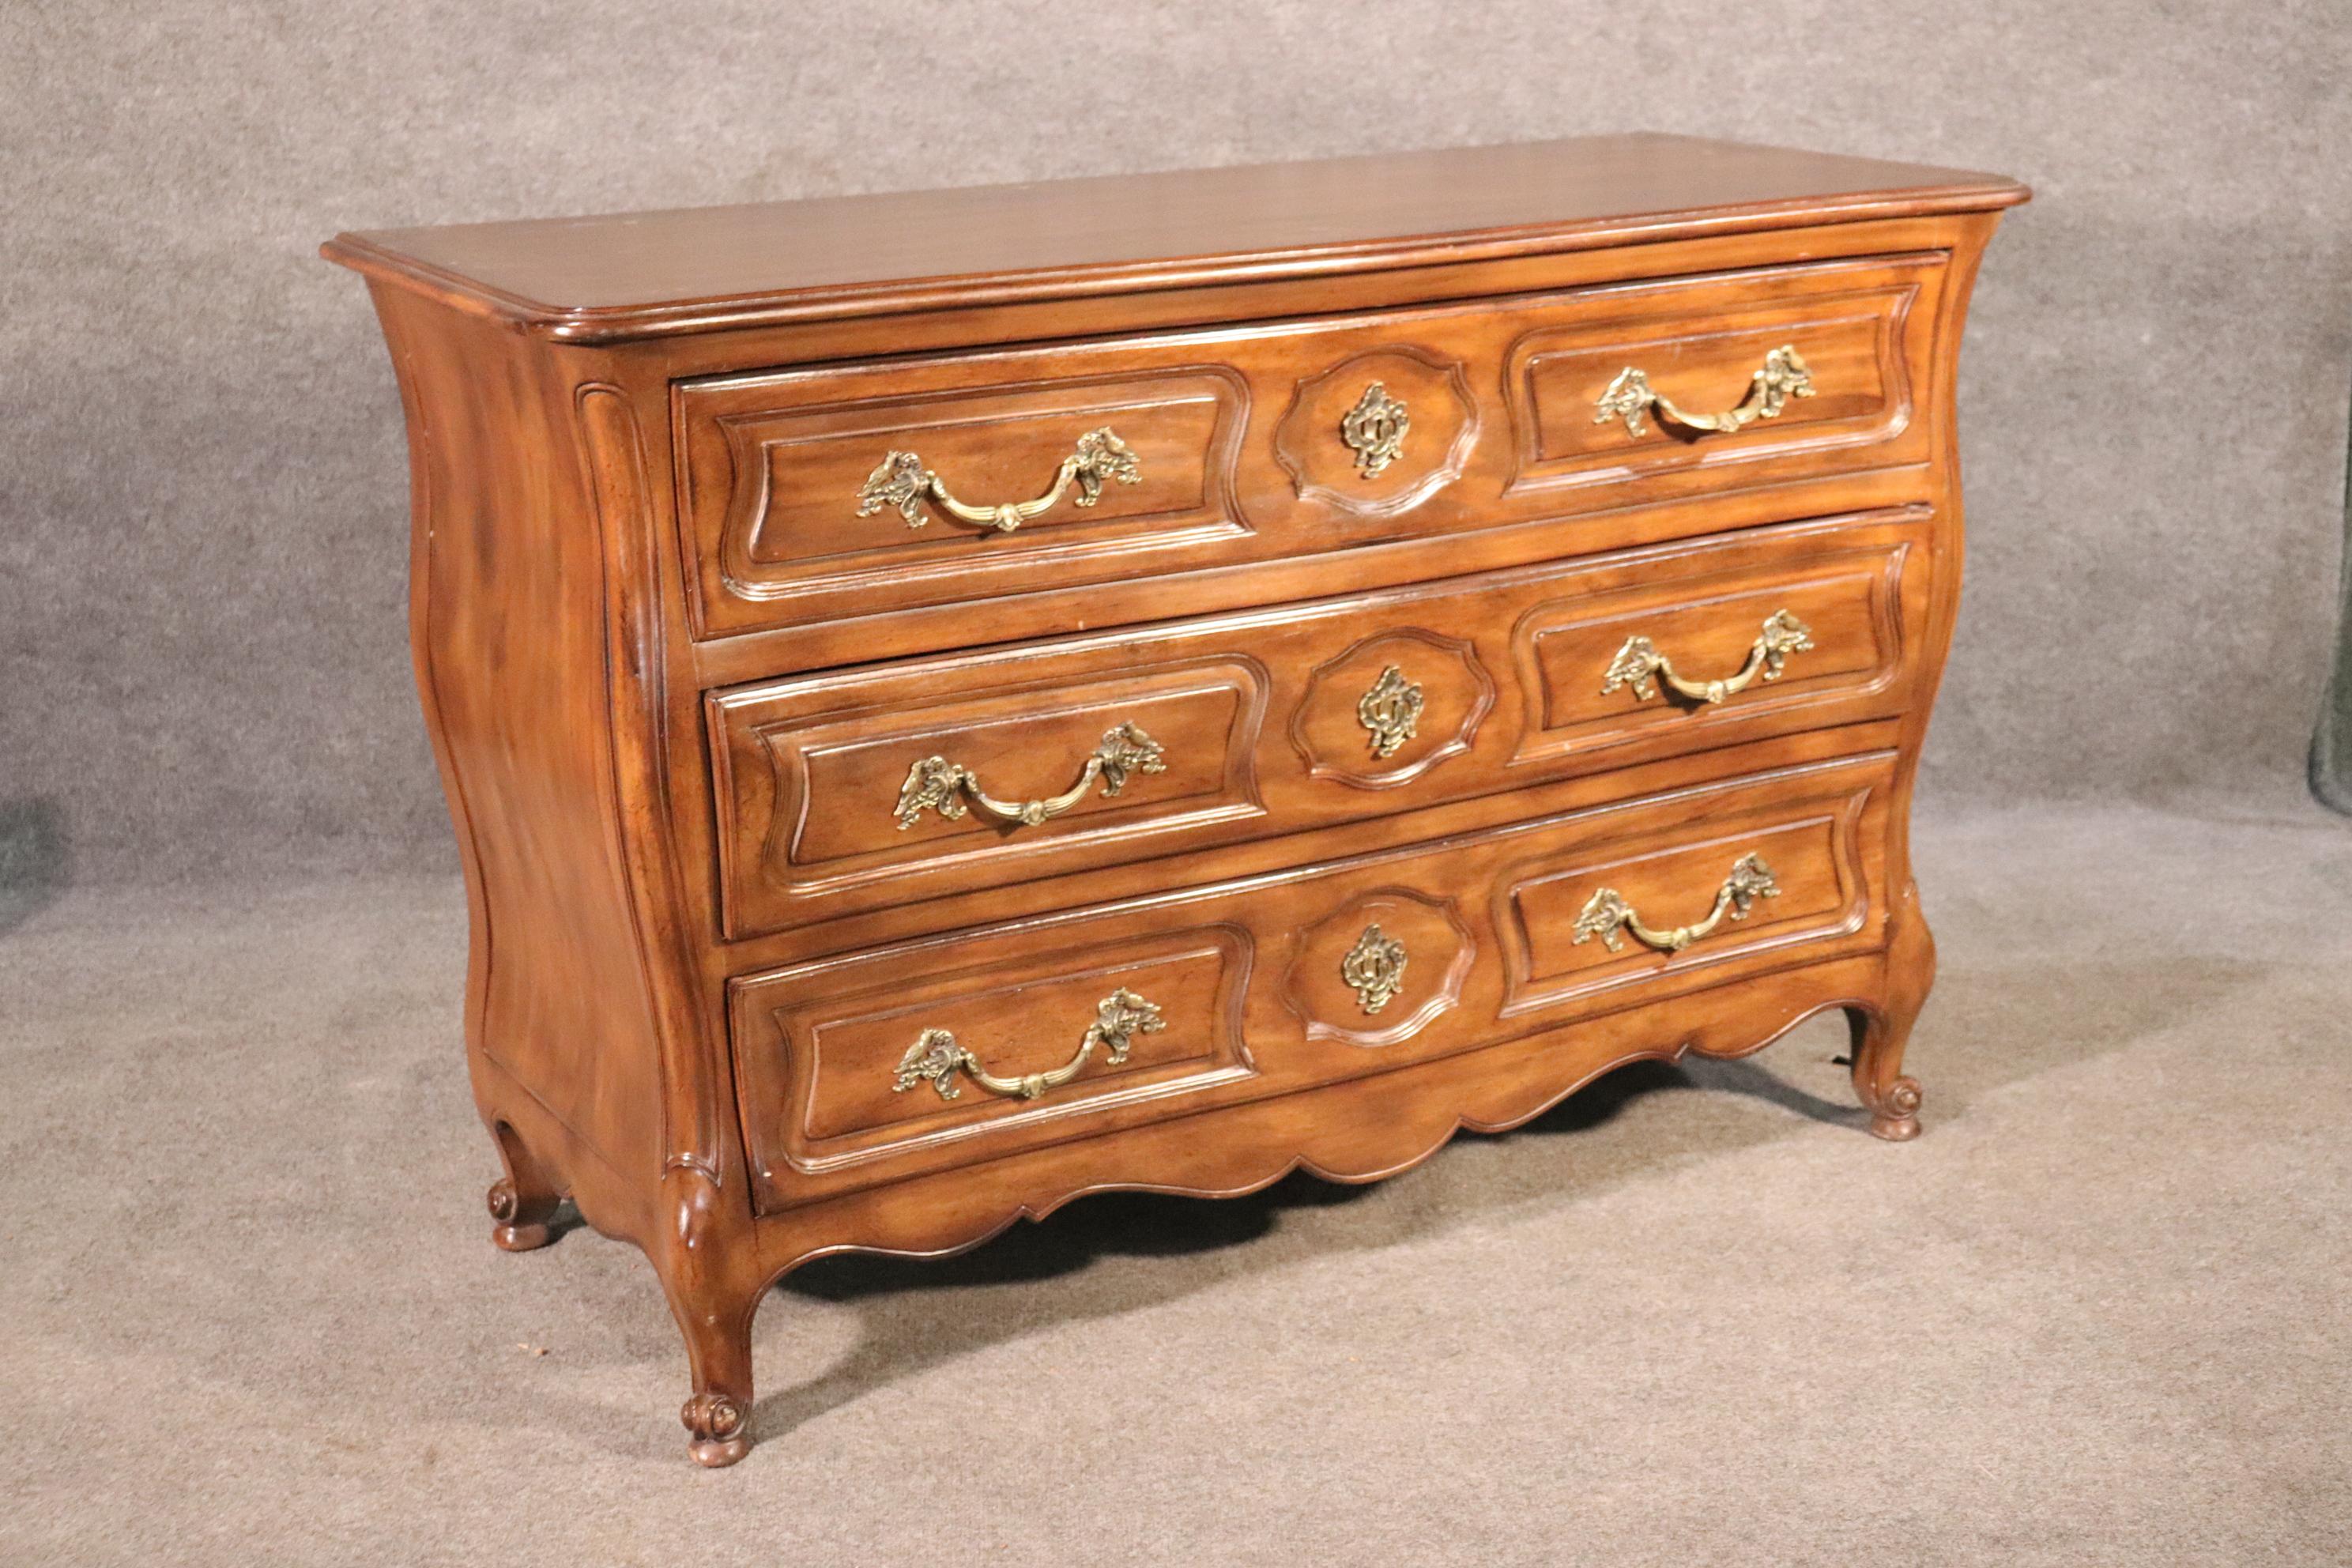 This is a simple and yet beautiful French Louis XV style dresser commode. The commode measures 37 tall x 56 wide x 23 deep. The piece is in good vintage condition.